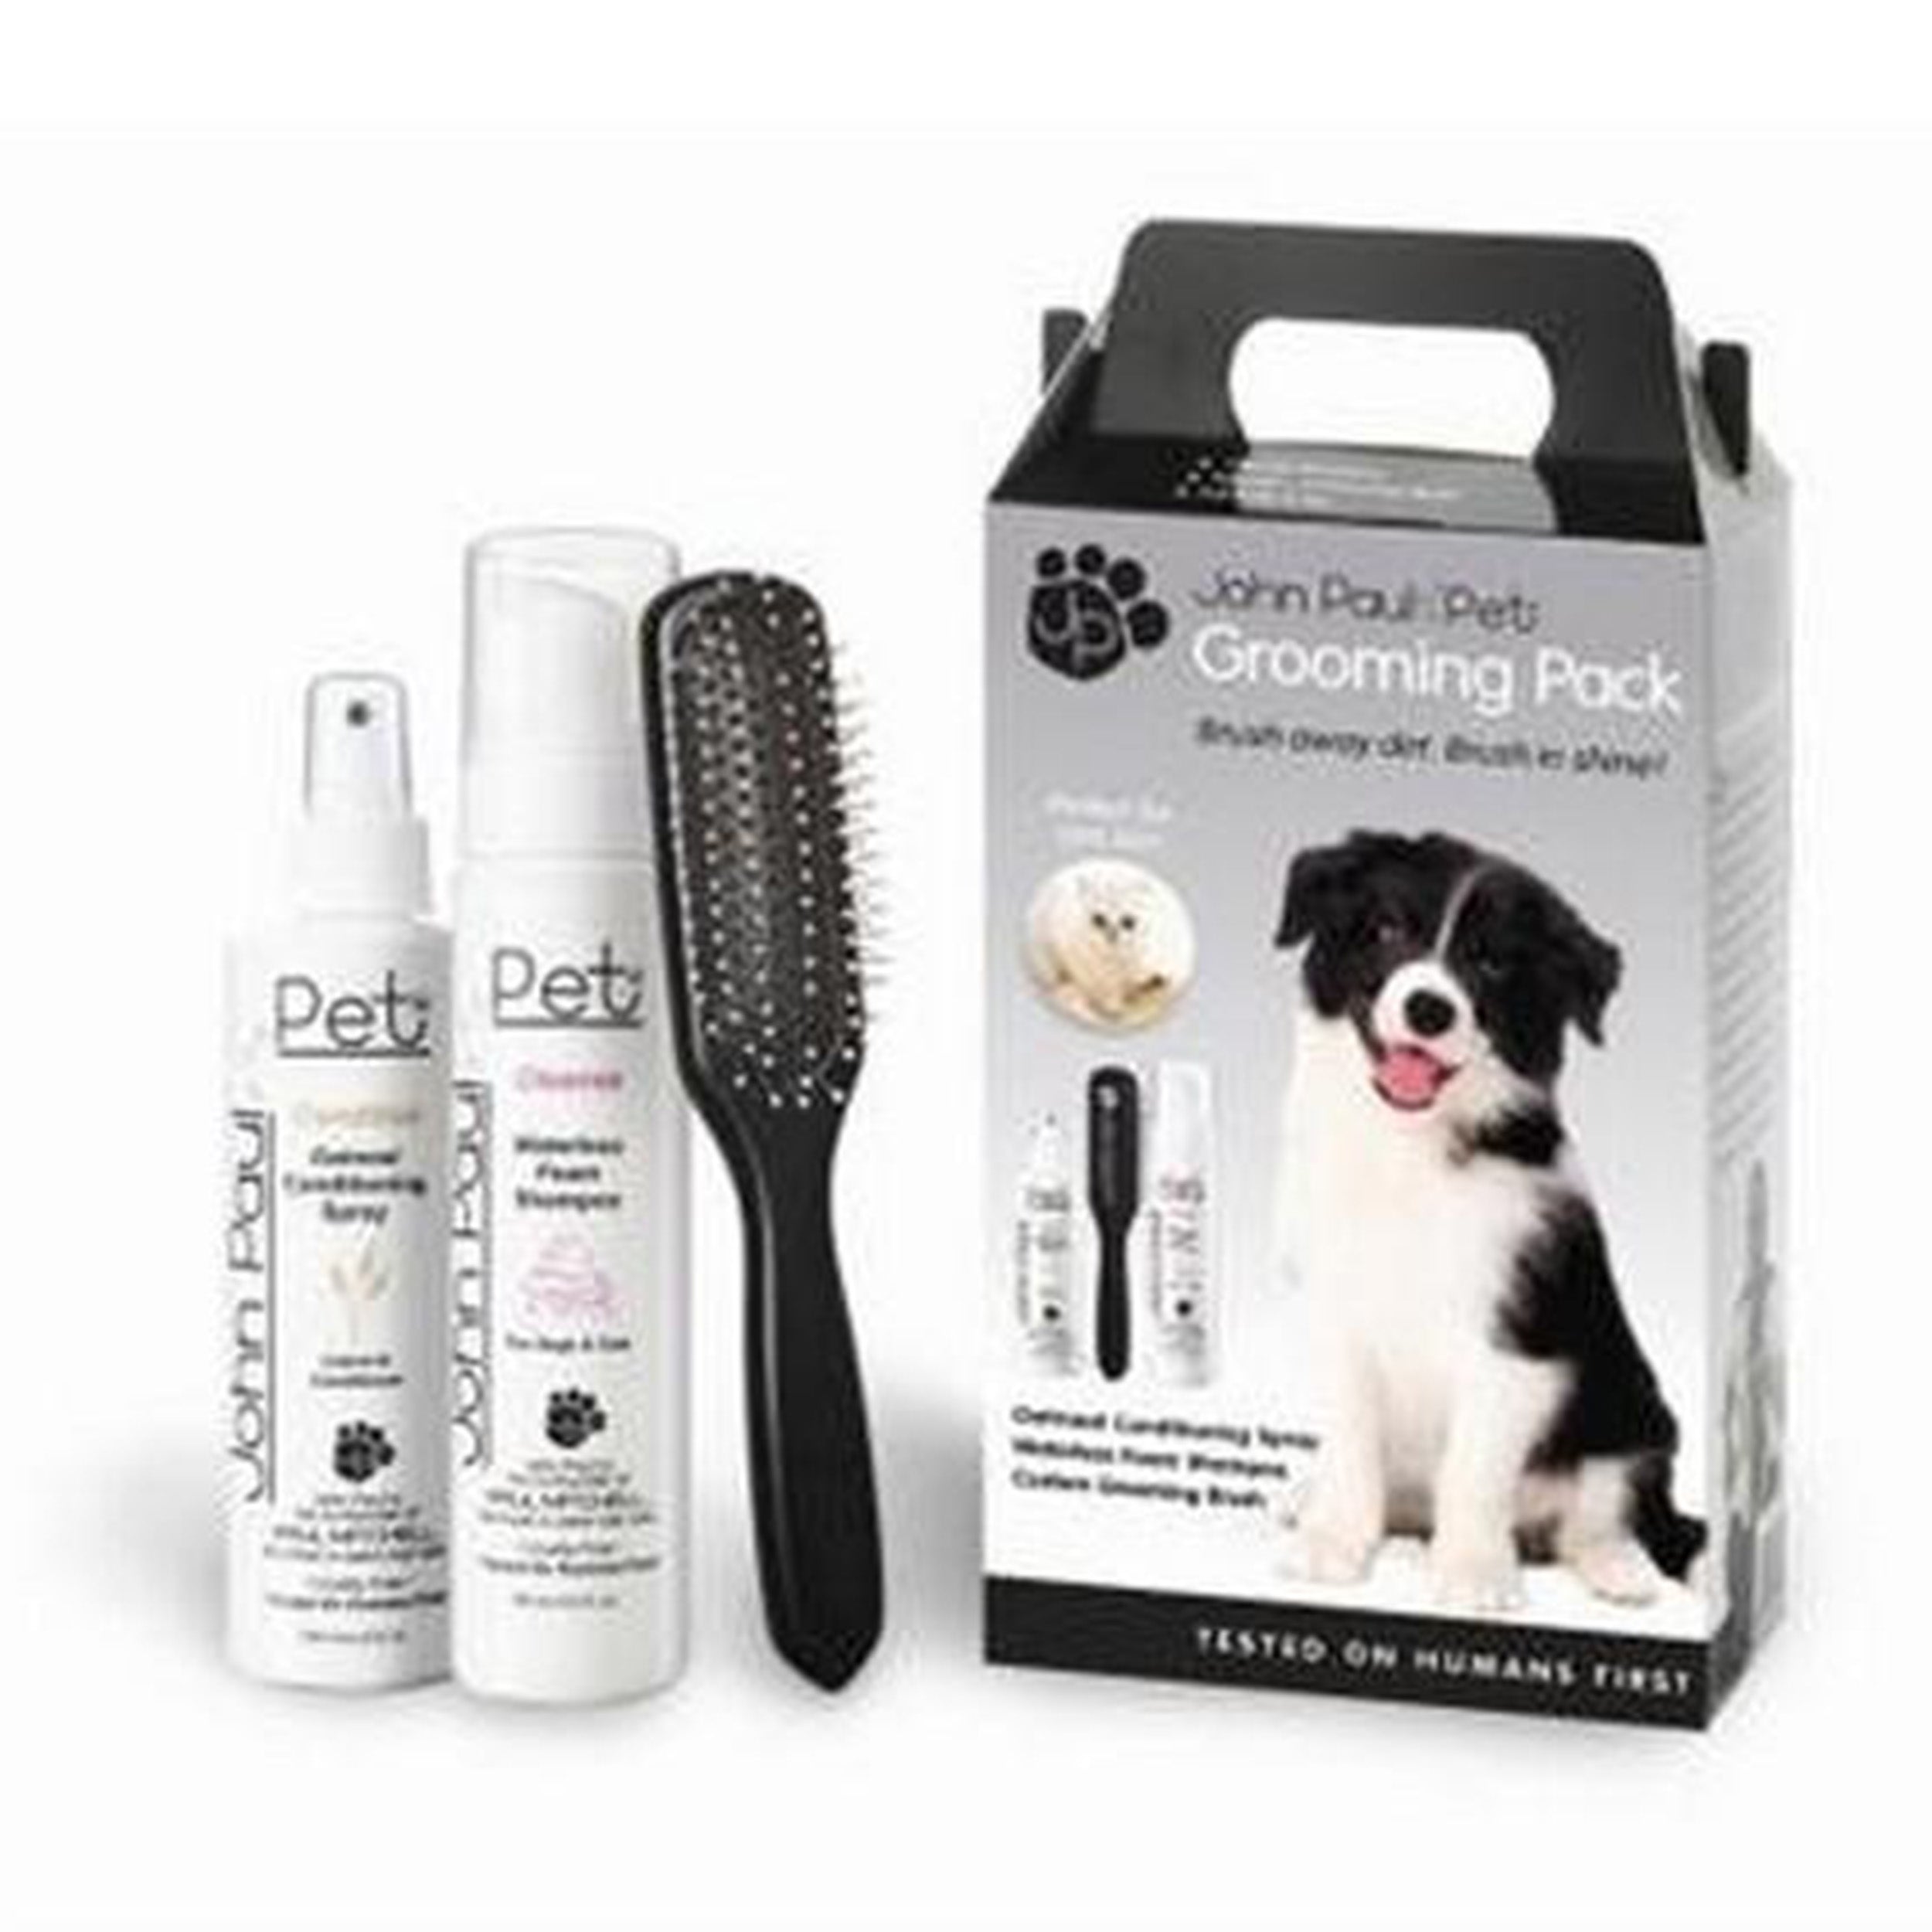 John Paul Pet Grooming Pack 3 Piece Set For Dogs And Cats